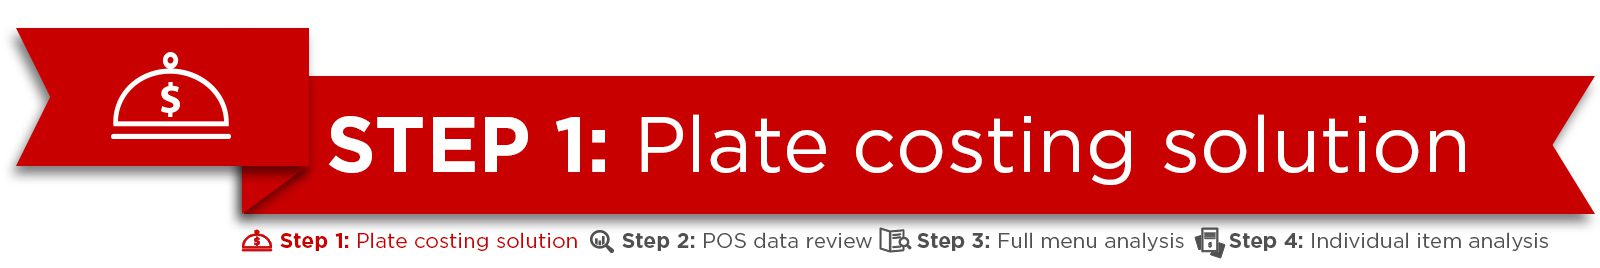 Step 1: Plate costing solution